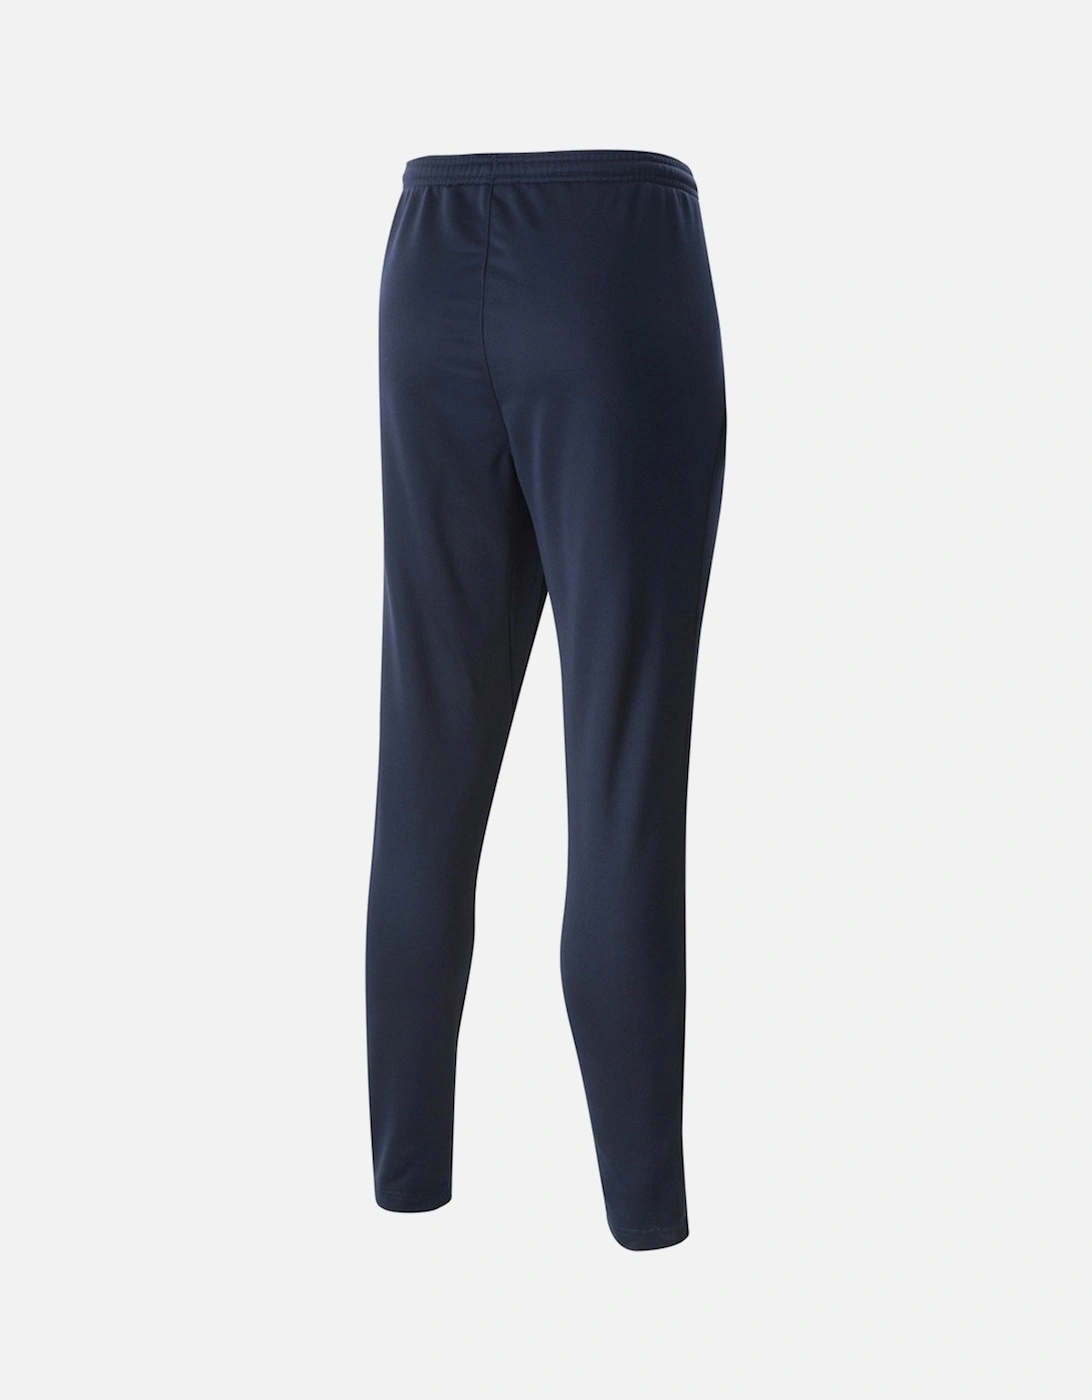 Childrens/Kids Woven Tapered Jogging Bottoms